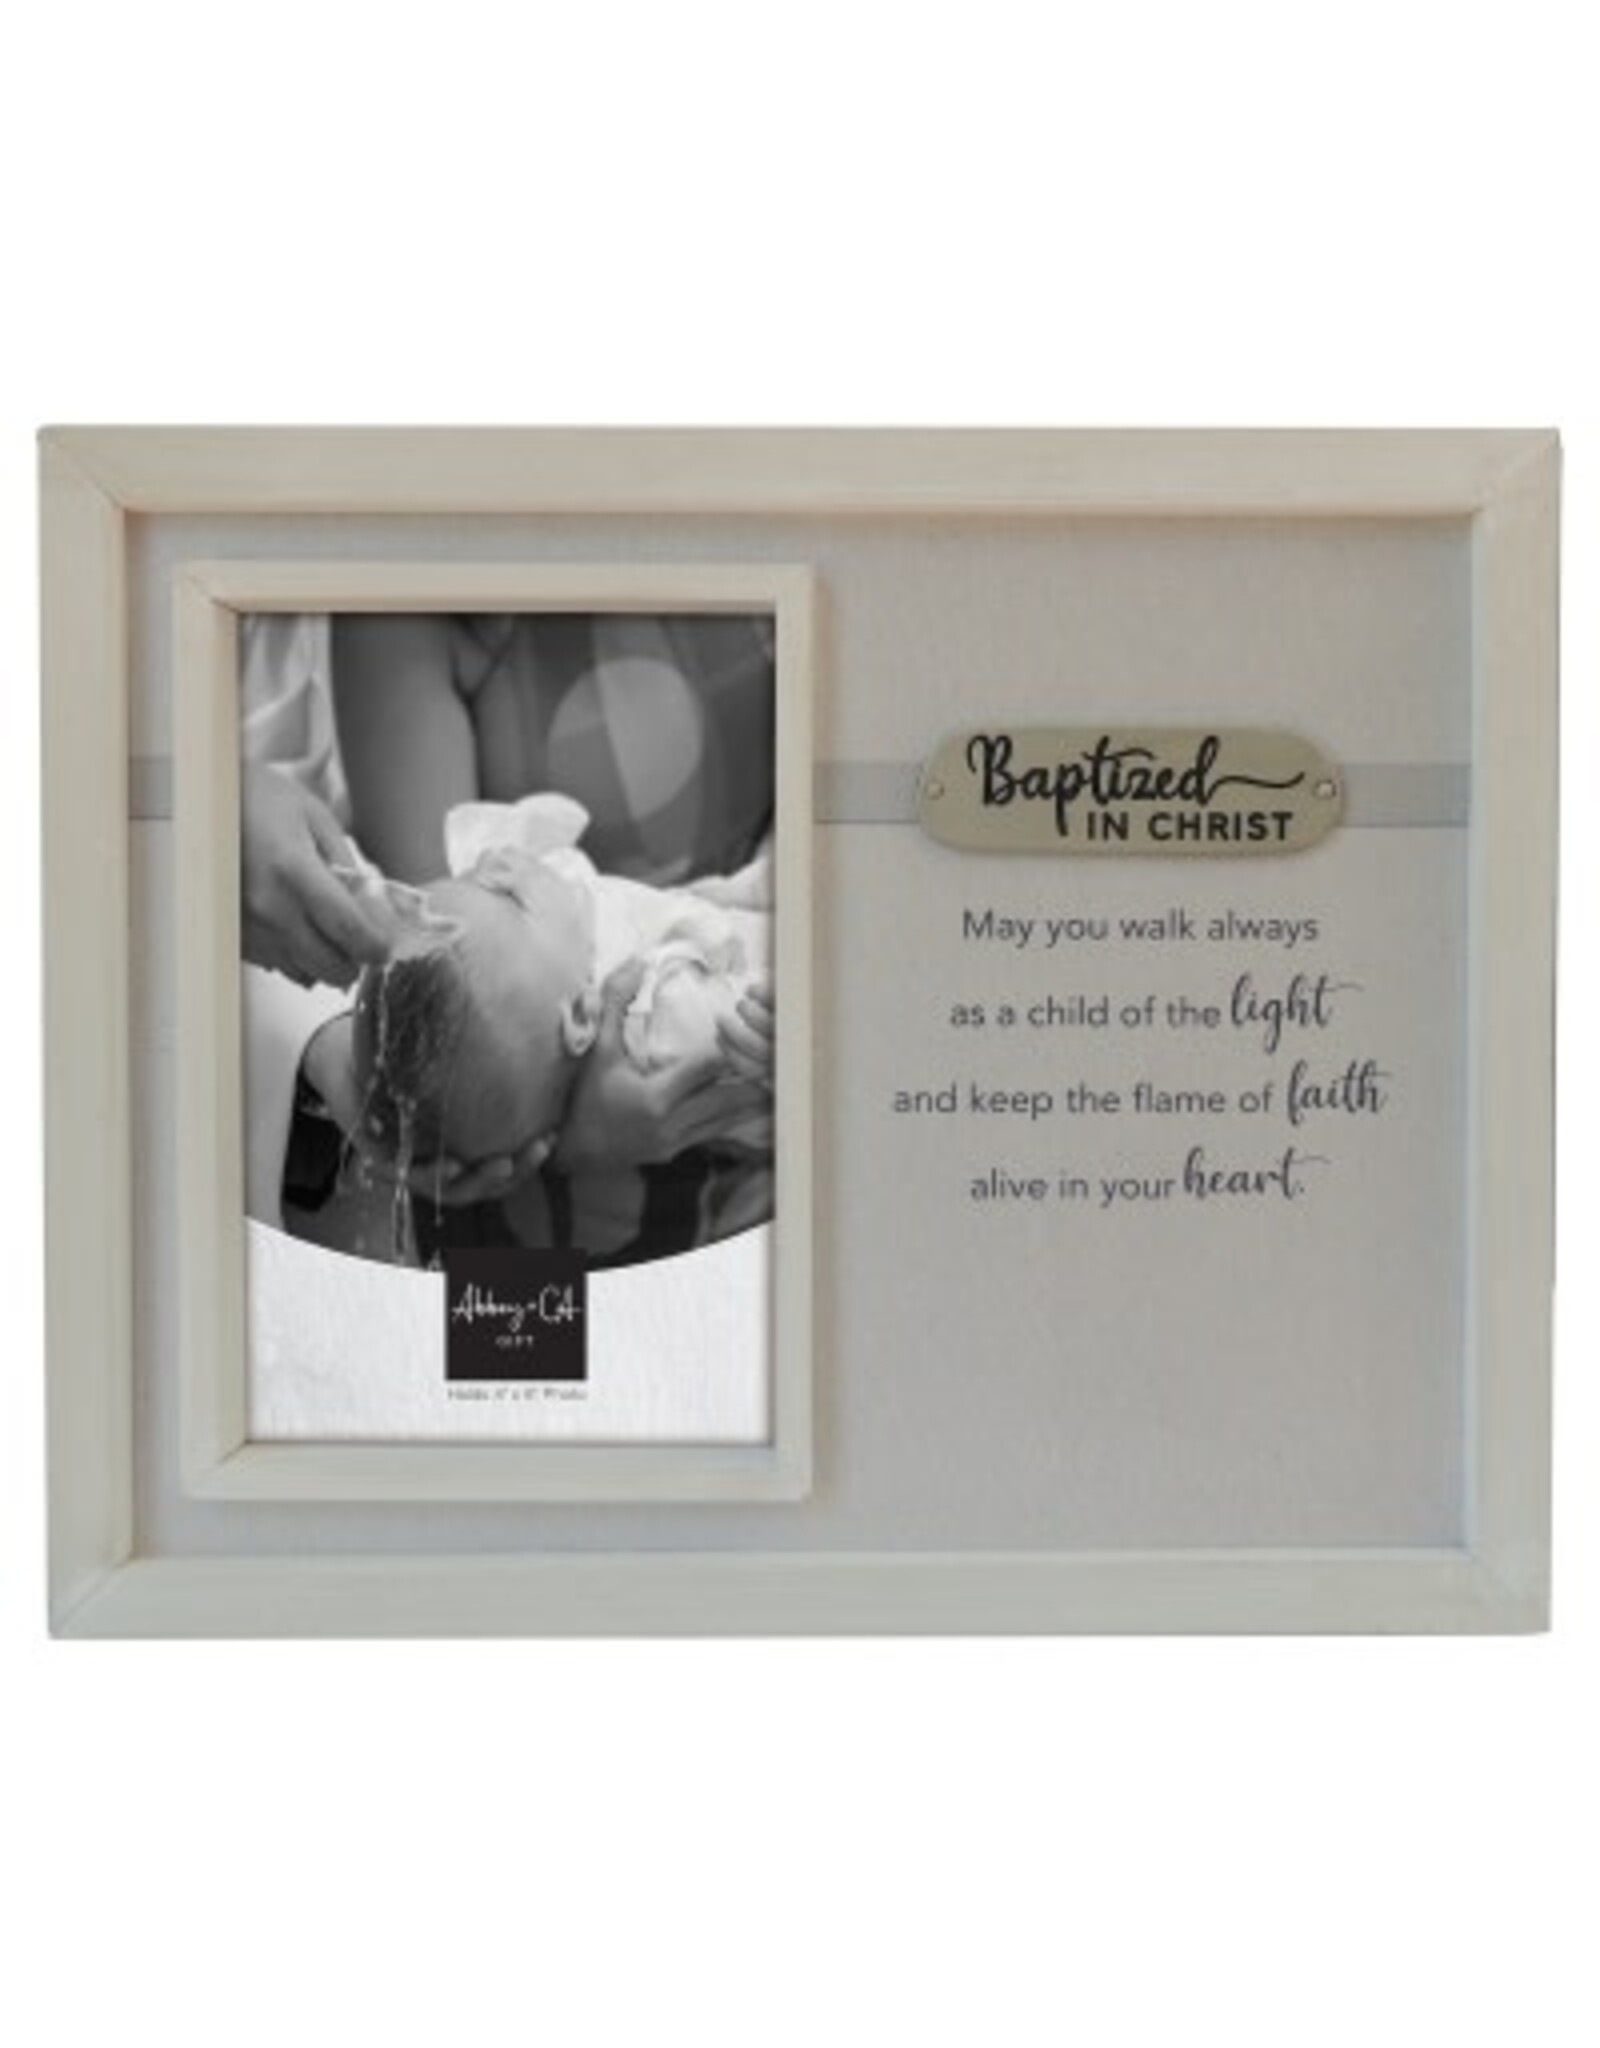 Abbey & CA Gift Baptism Picture Frame - Baptized in Christ